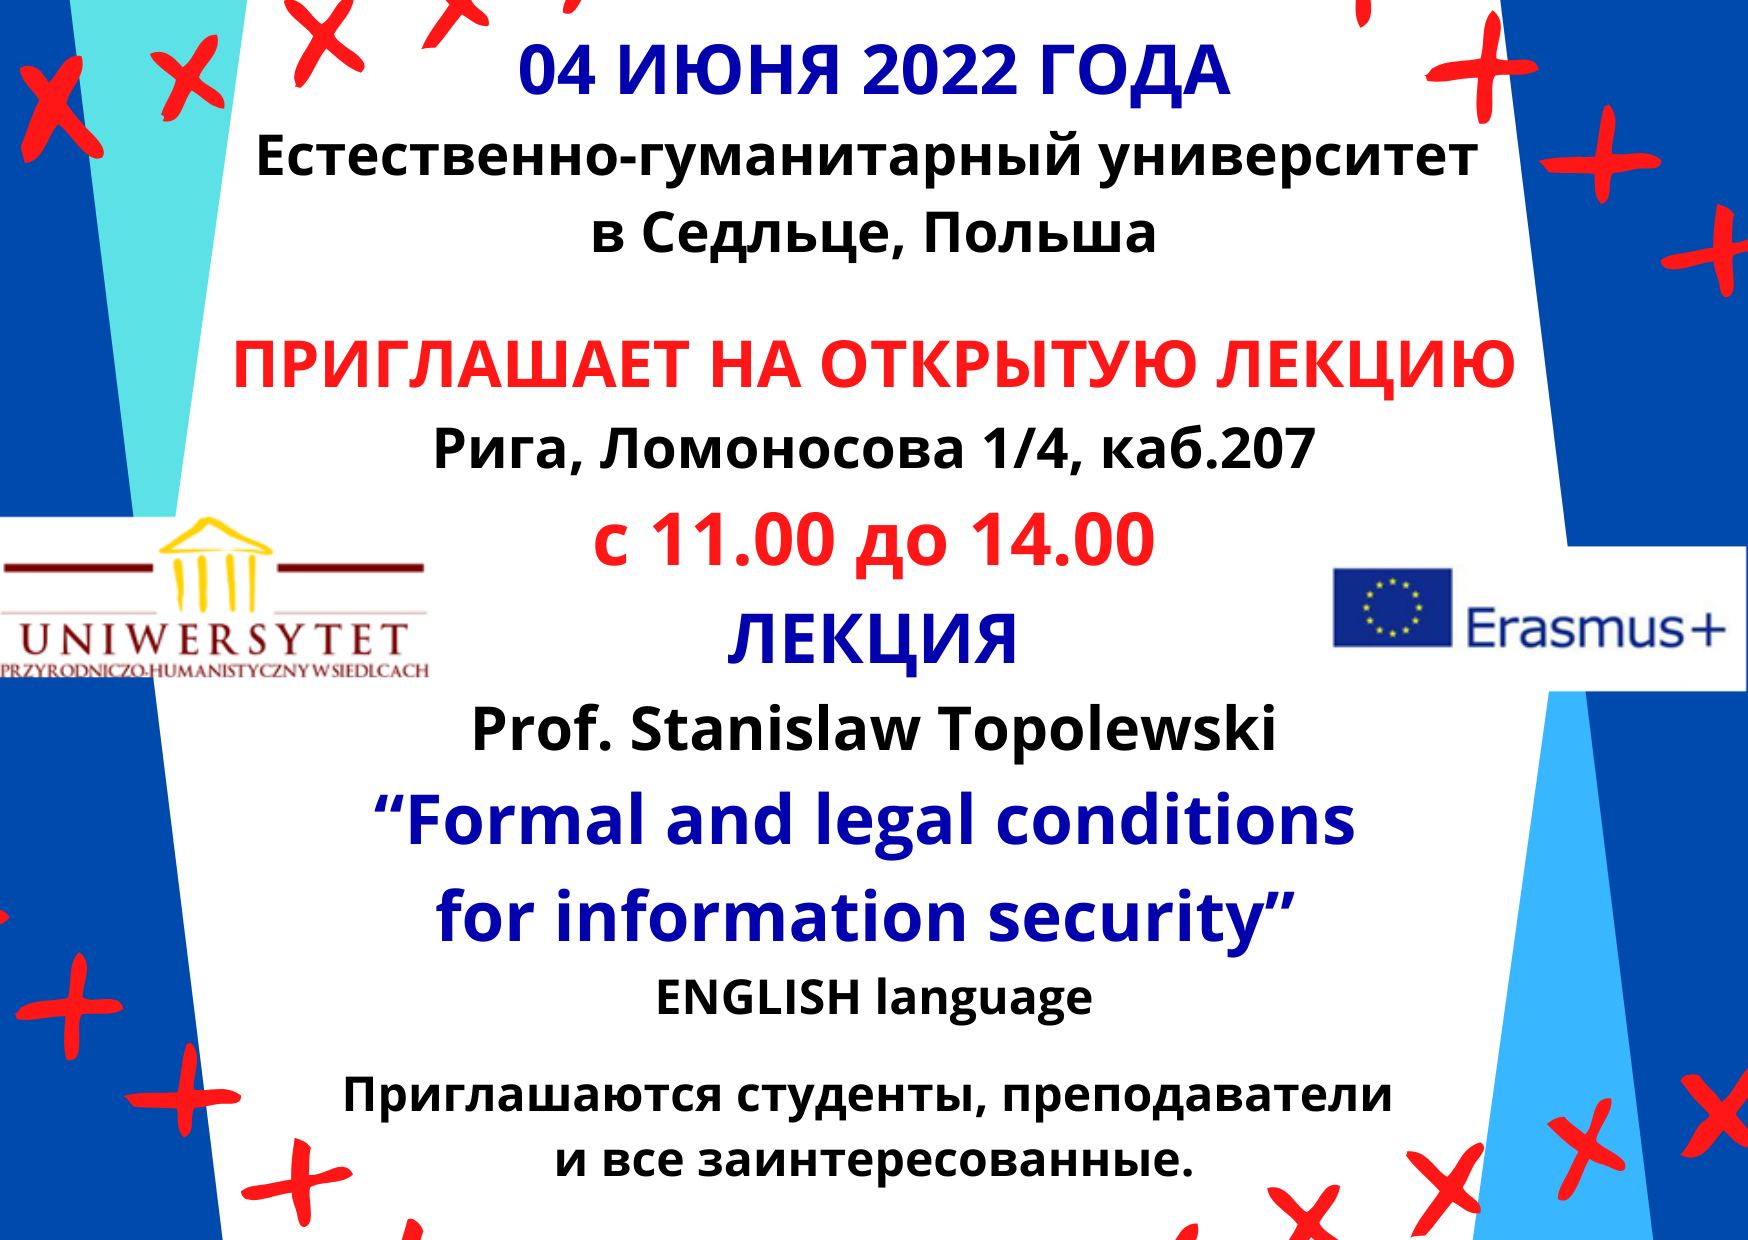 Лекция “Formal and legal conditions for information security”